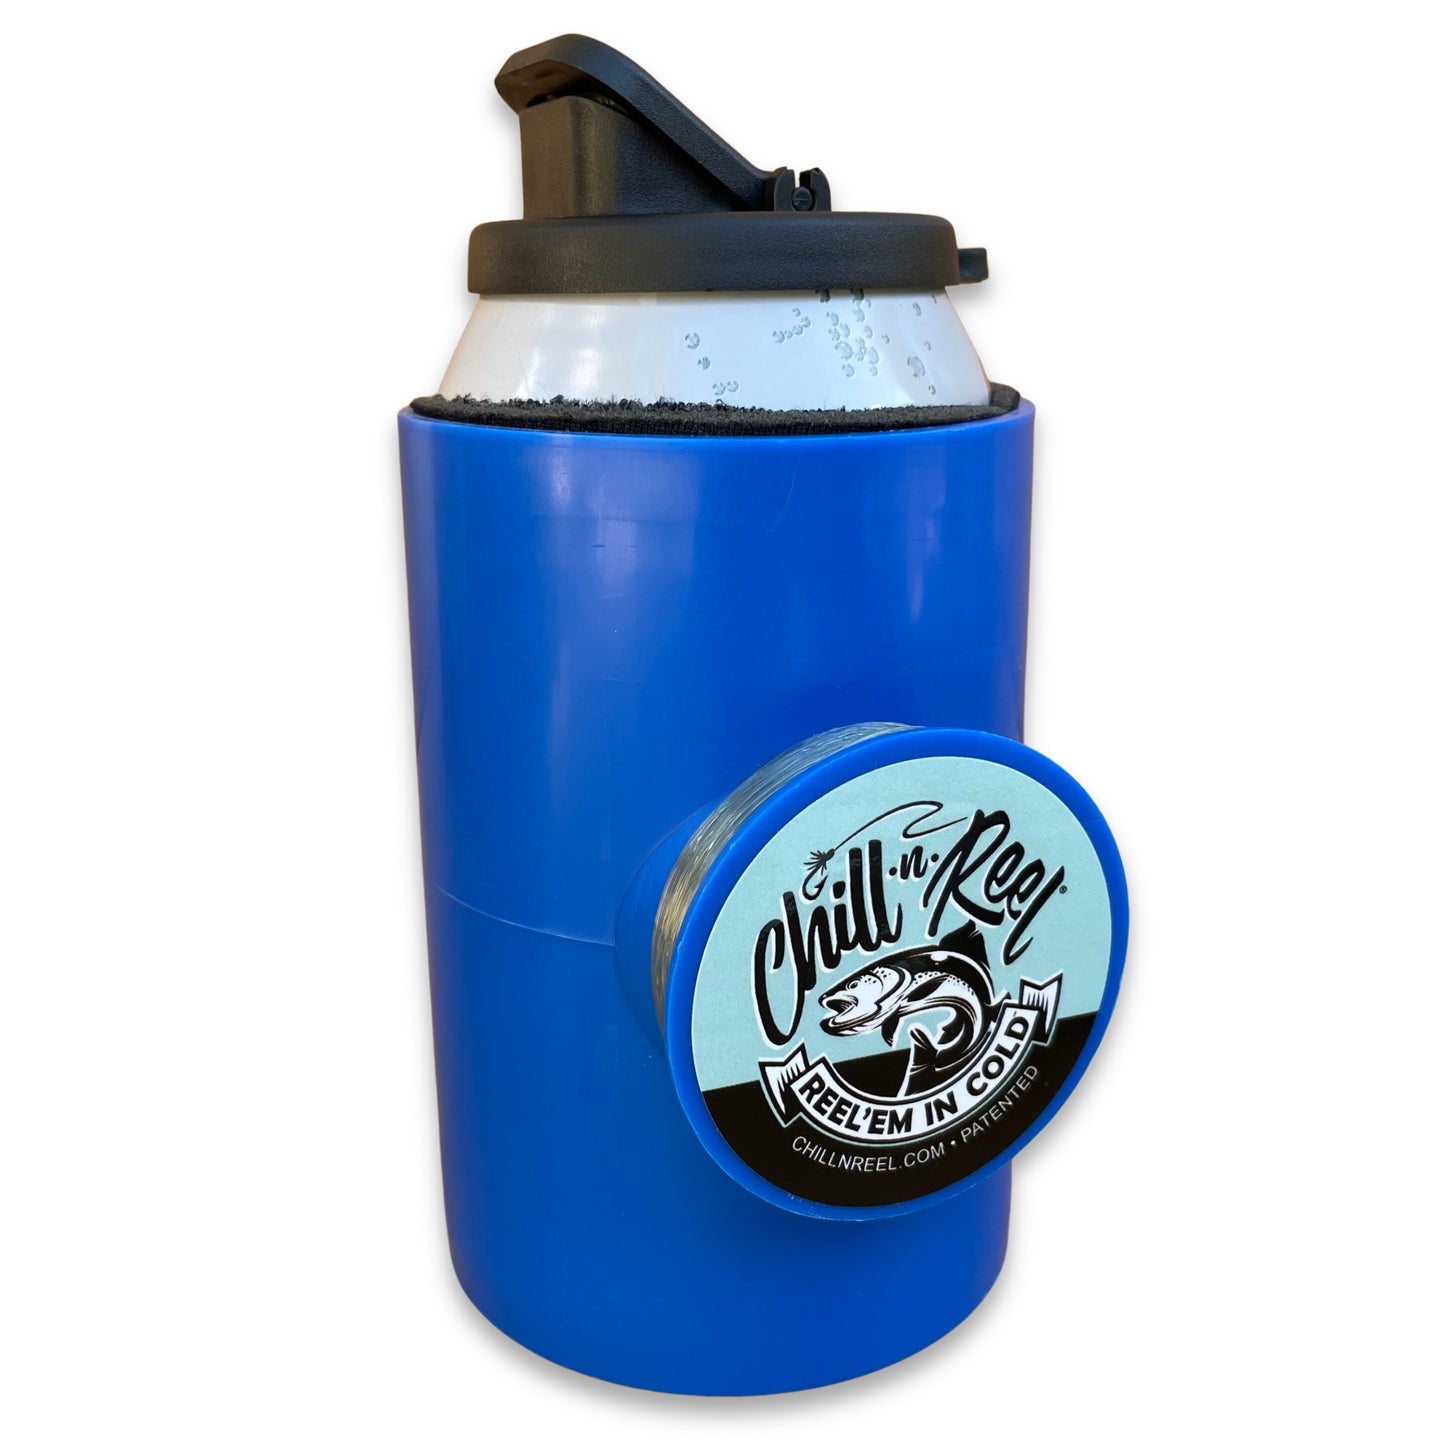 A blue insulated beverage holder with a black flip-top lid and a round, blue handle on the side featuring the logo of "Chill-N-Reel Reel'em in Cold." The logo includes an image of a fish and the text "CHILLNREEL.COM" at the bottom. This Chill-N-Reel product, known as the Original Chill-N-Reel, makes a fun fishing gift for outdoor enthusiasts.